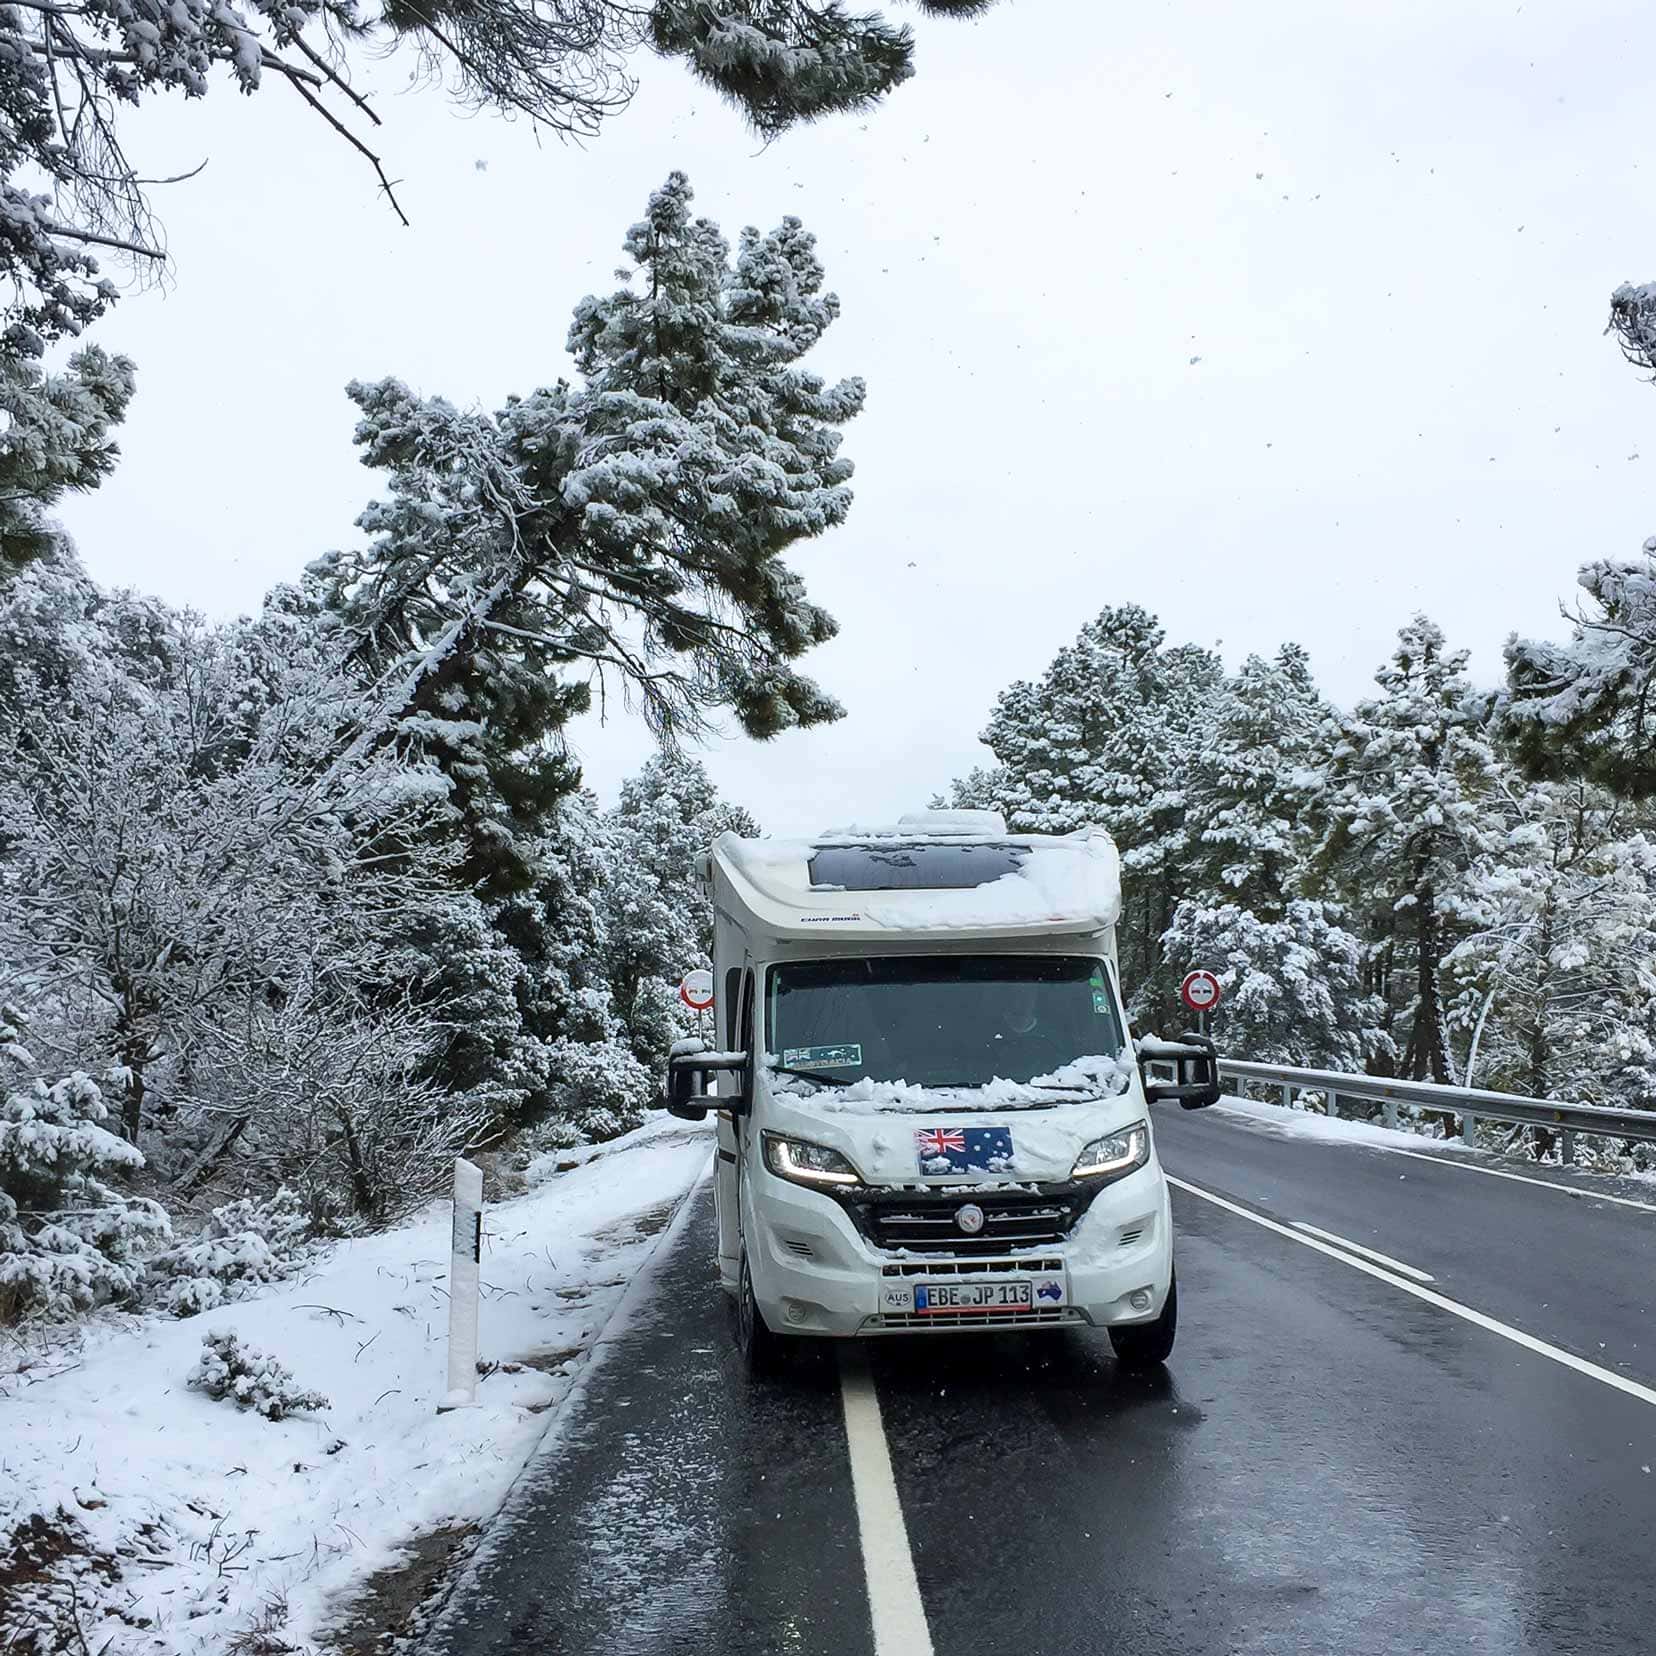  Cuenca-our snow covered motorhome